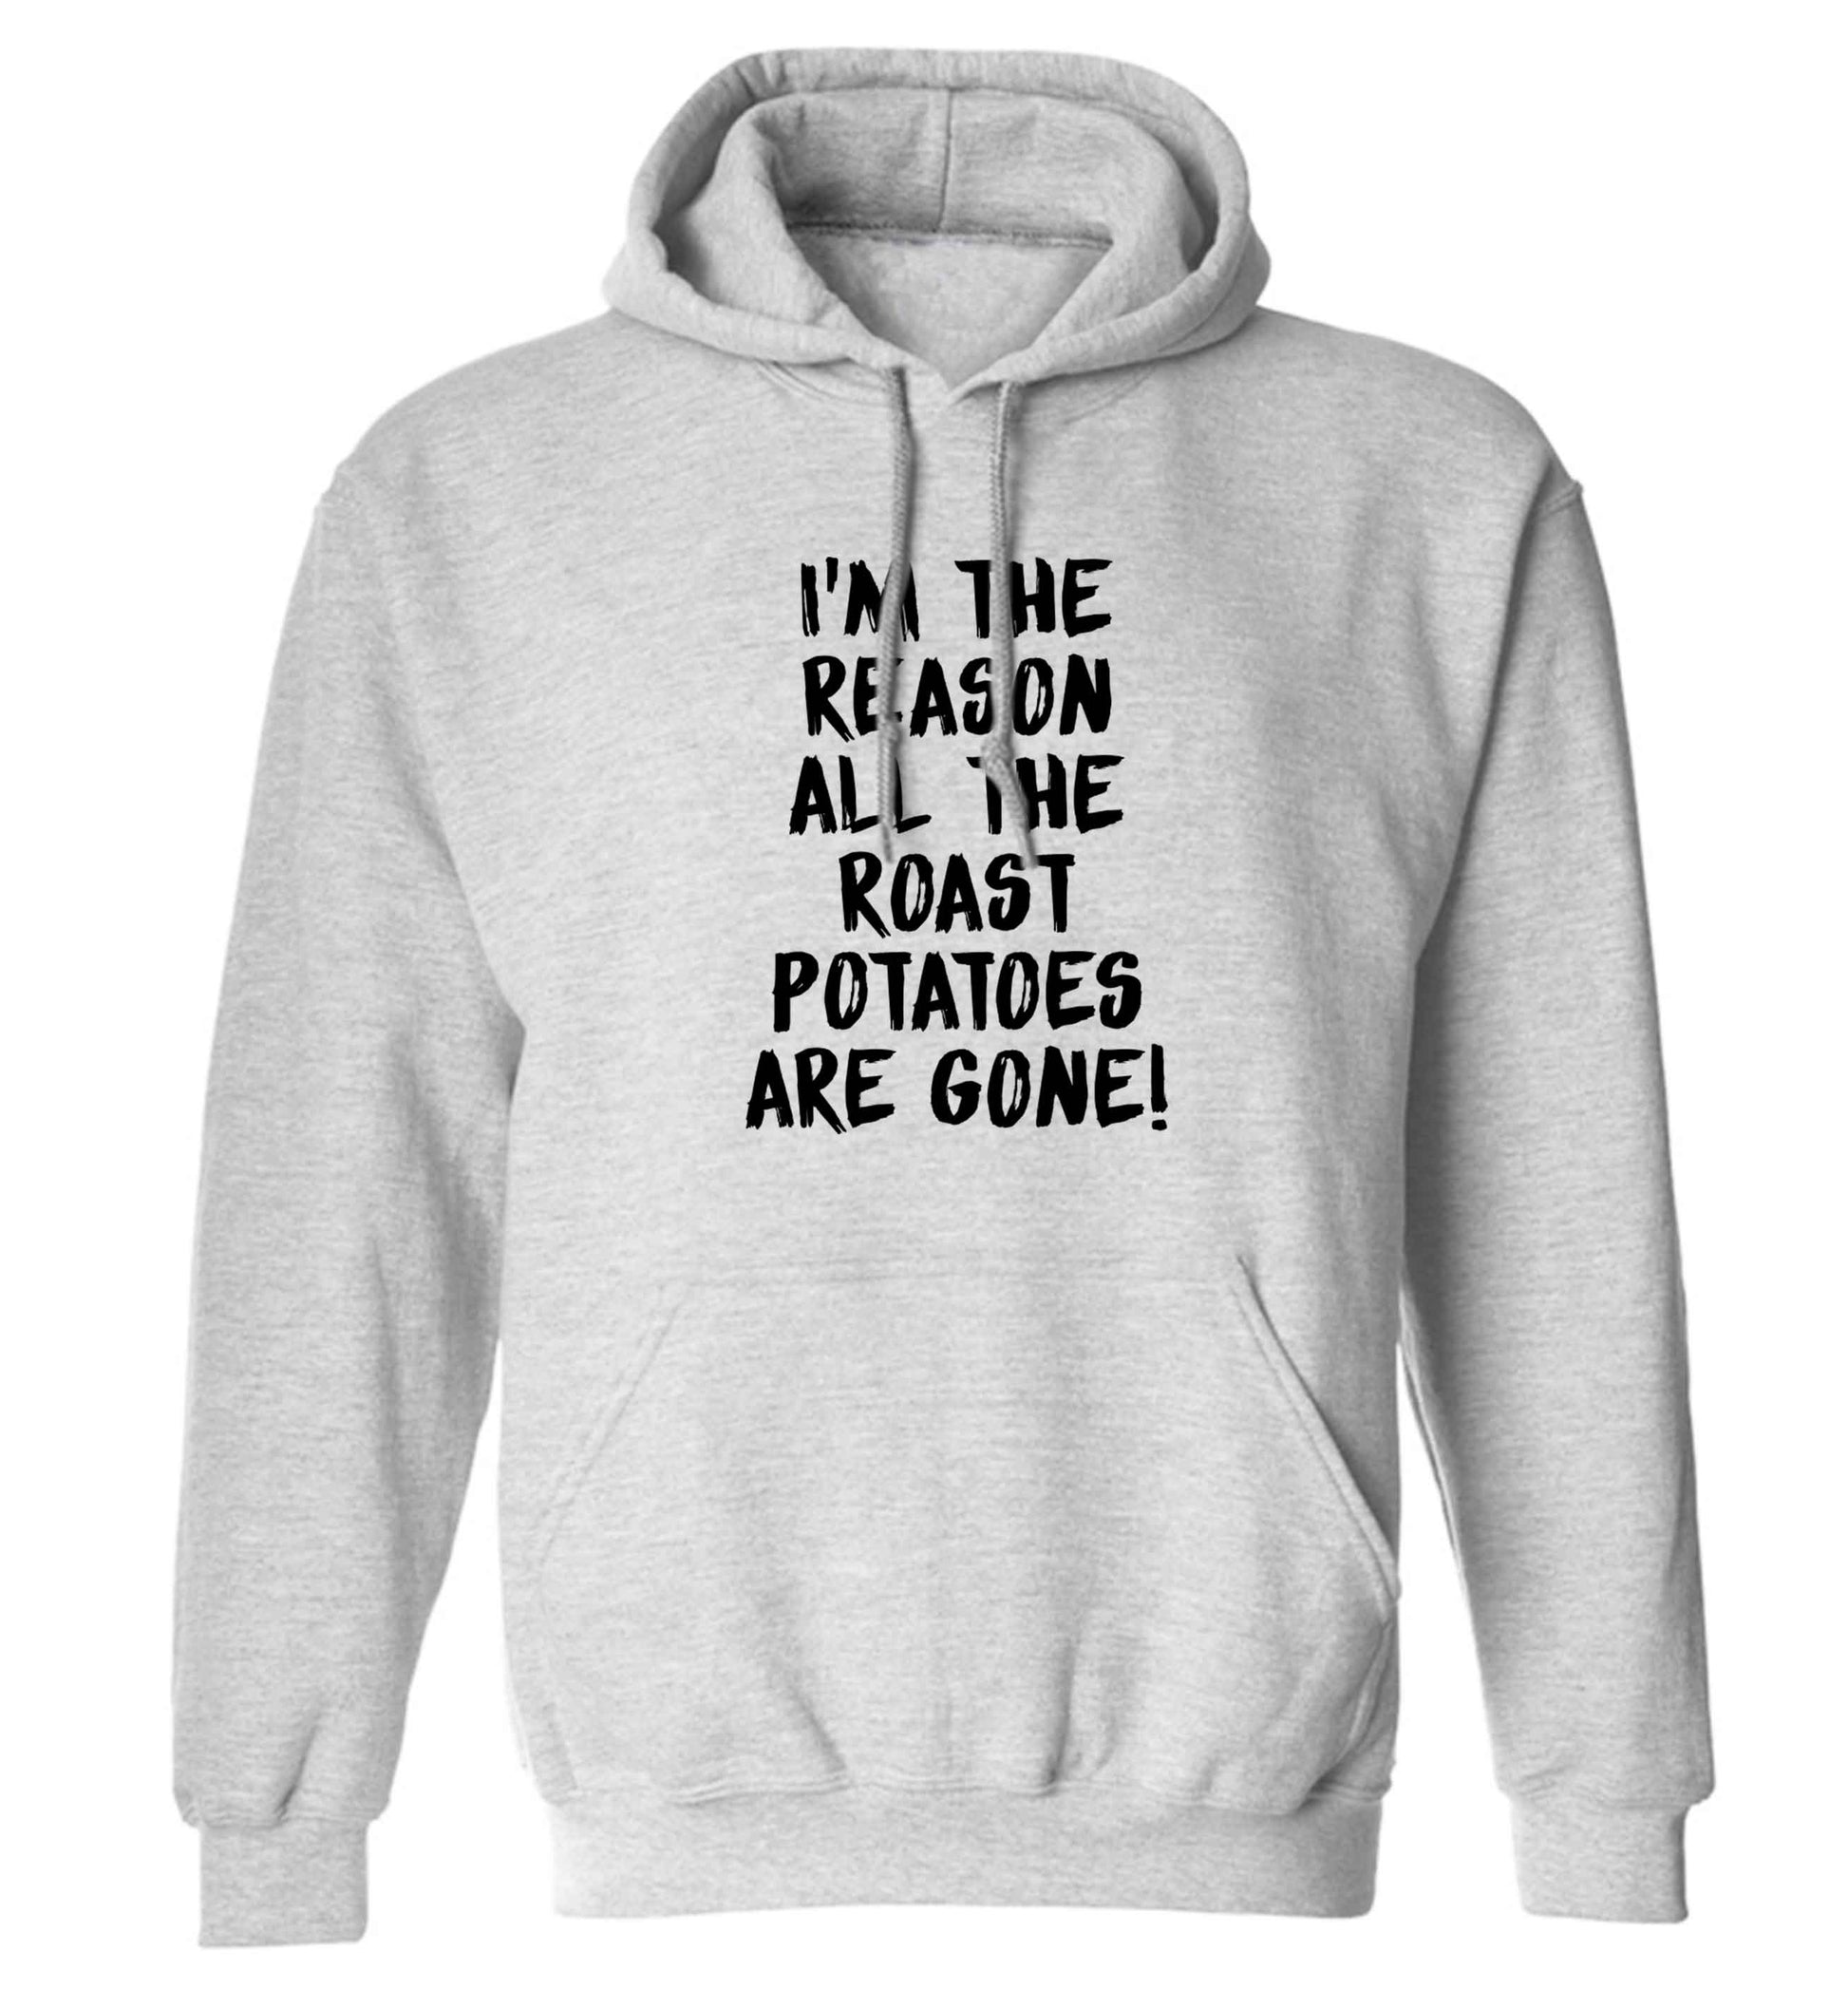 I'm the reason all the roast potatoes are gone adults unisex grey hoodie 2XL